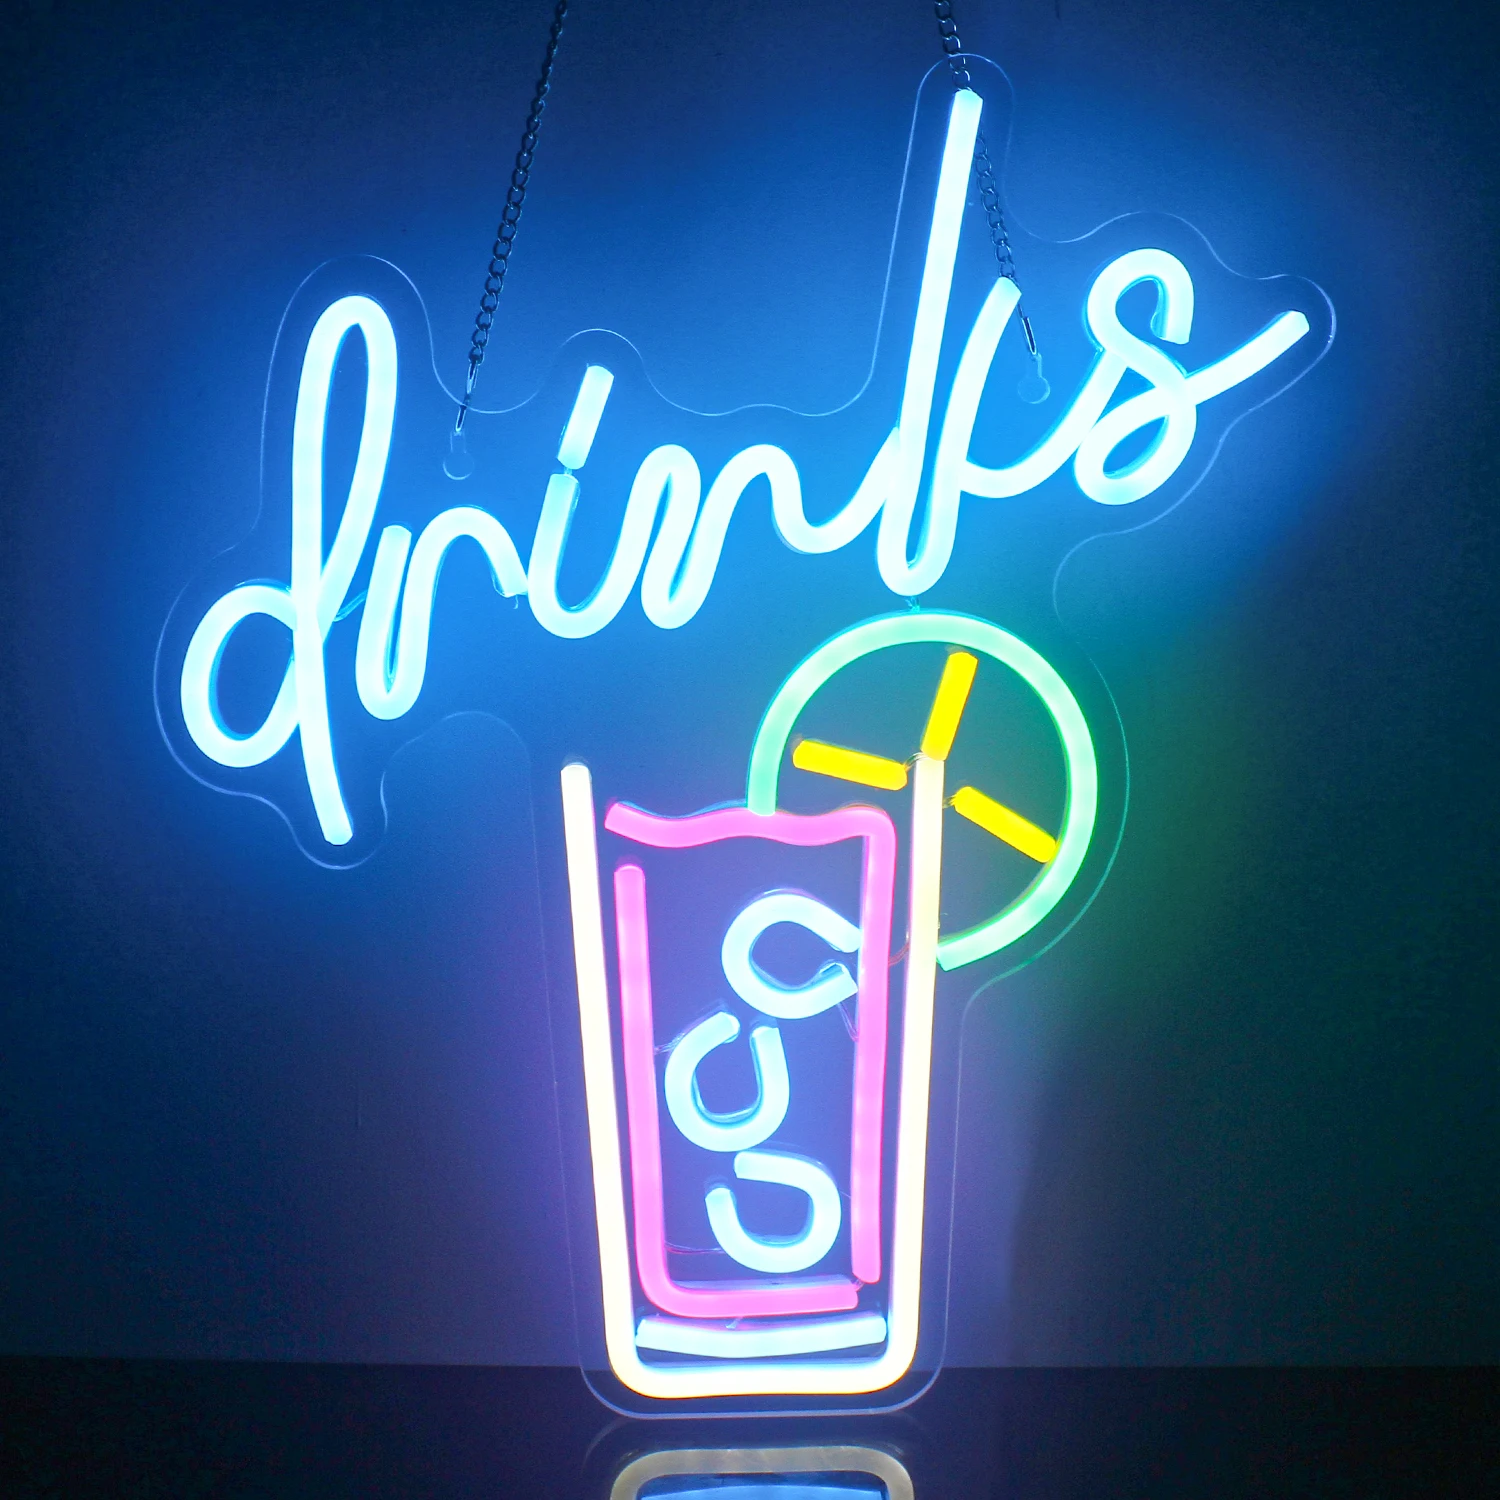 Drinks Neon Signs Cool Drink Cup LED Neon Signs Bar Neon Signs for Wall Decor USB Bar Club Restaurant Cafes Shops Party Neon